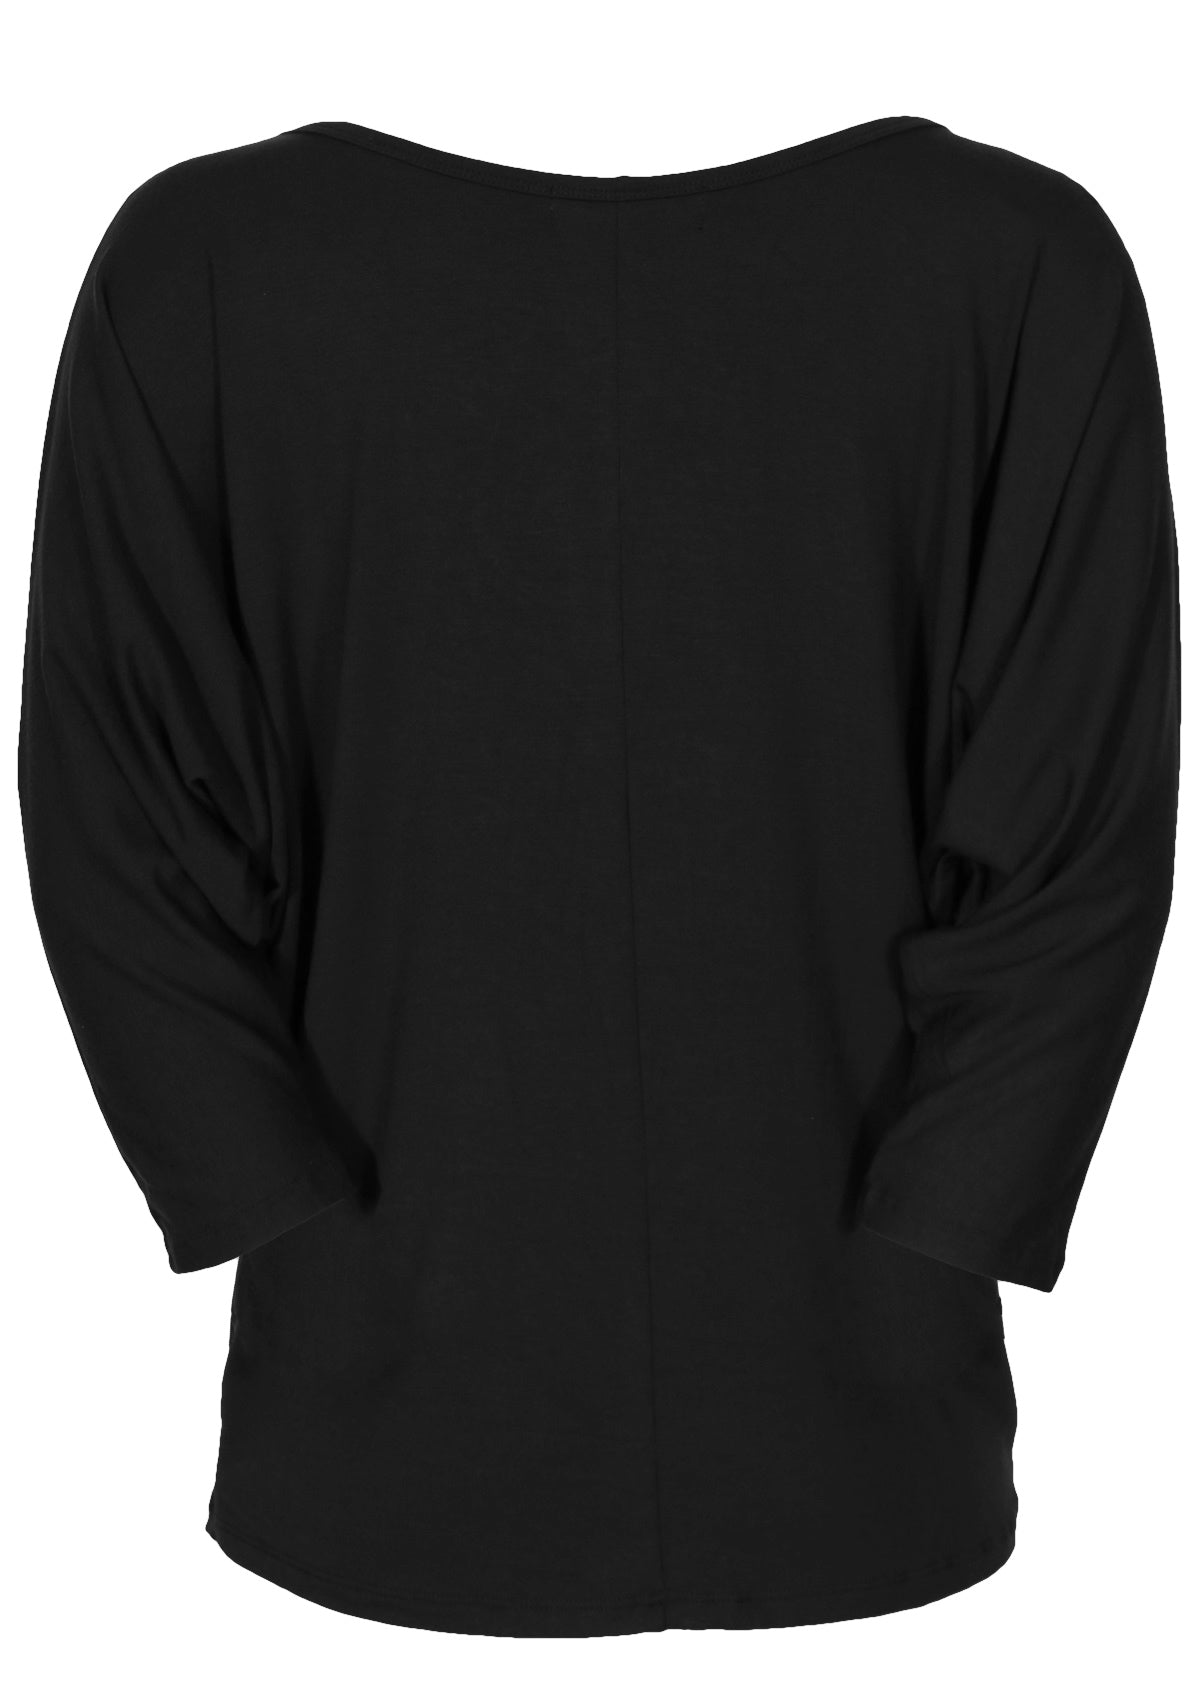 Back view of women's 3/4 sleeve rayon batwing round neckline black top.